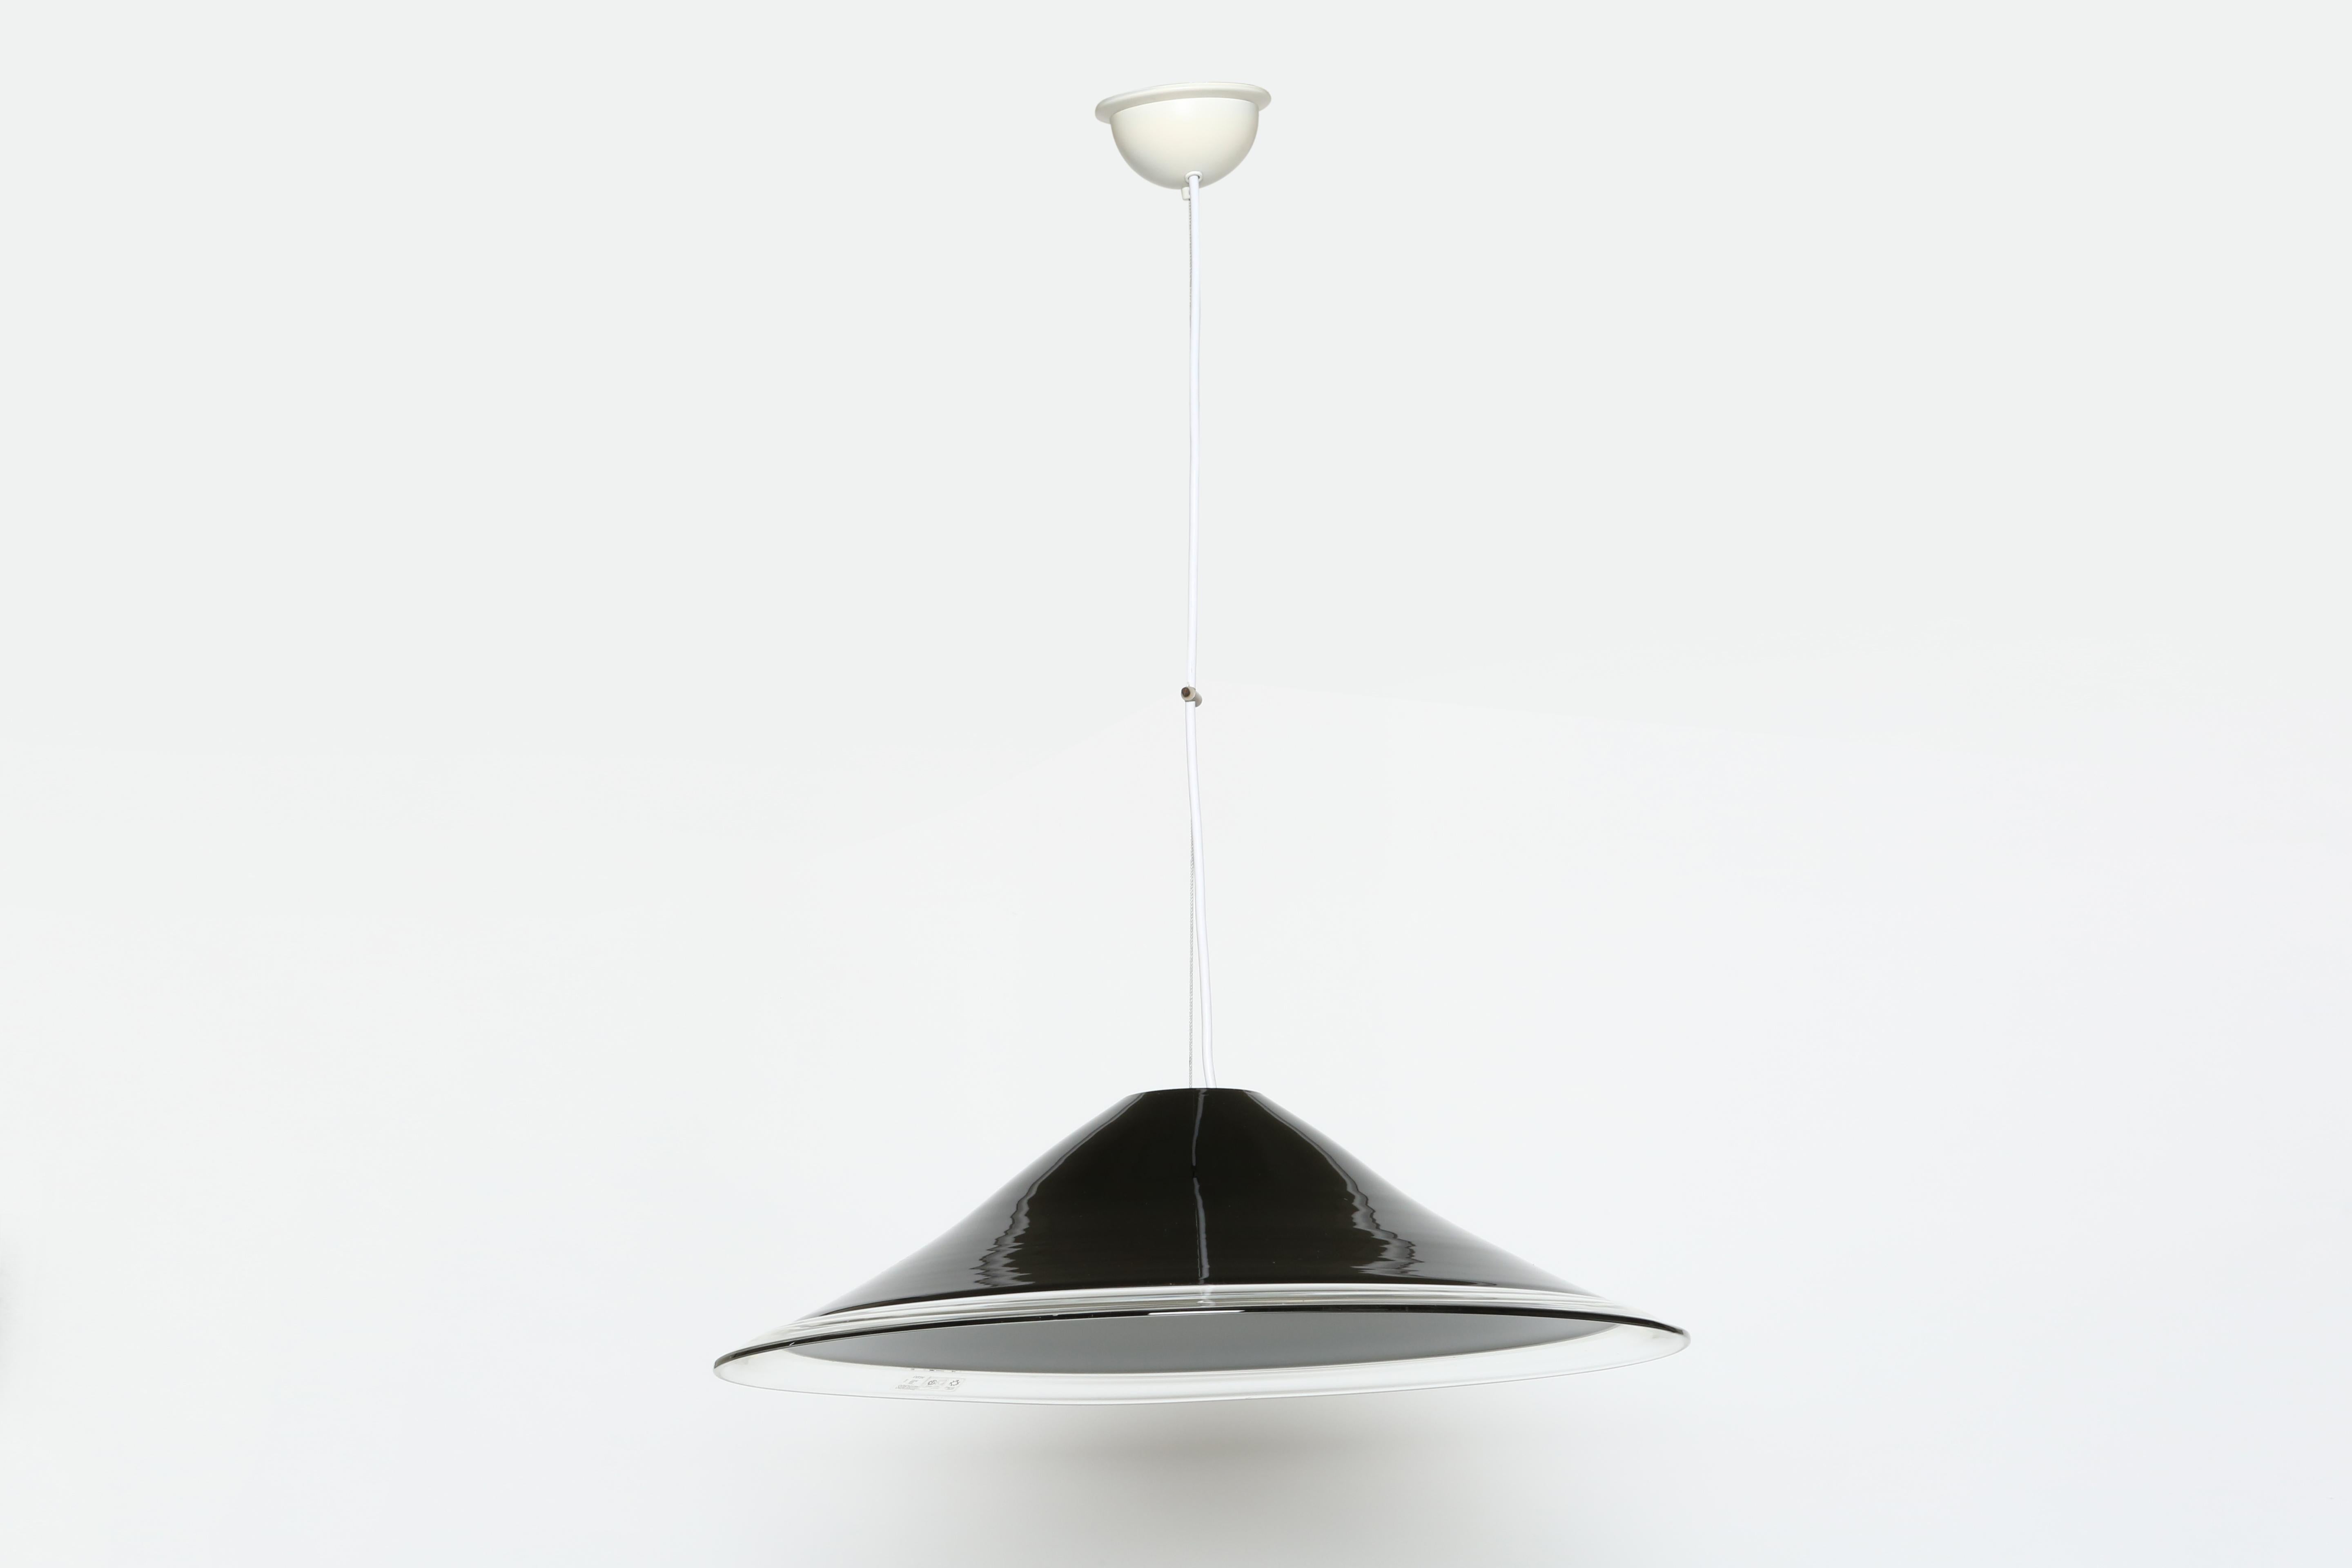 Ceiling pendant lights by Renato Toso for Leucos.
Made in the late 1960s.
Murano glass black on top, white inside the shade with a clear band on the edge.
Very impressive glass quality.
Four pendants available.
Priced per item.

We take pride in